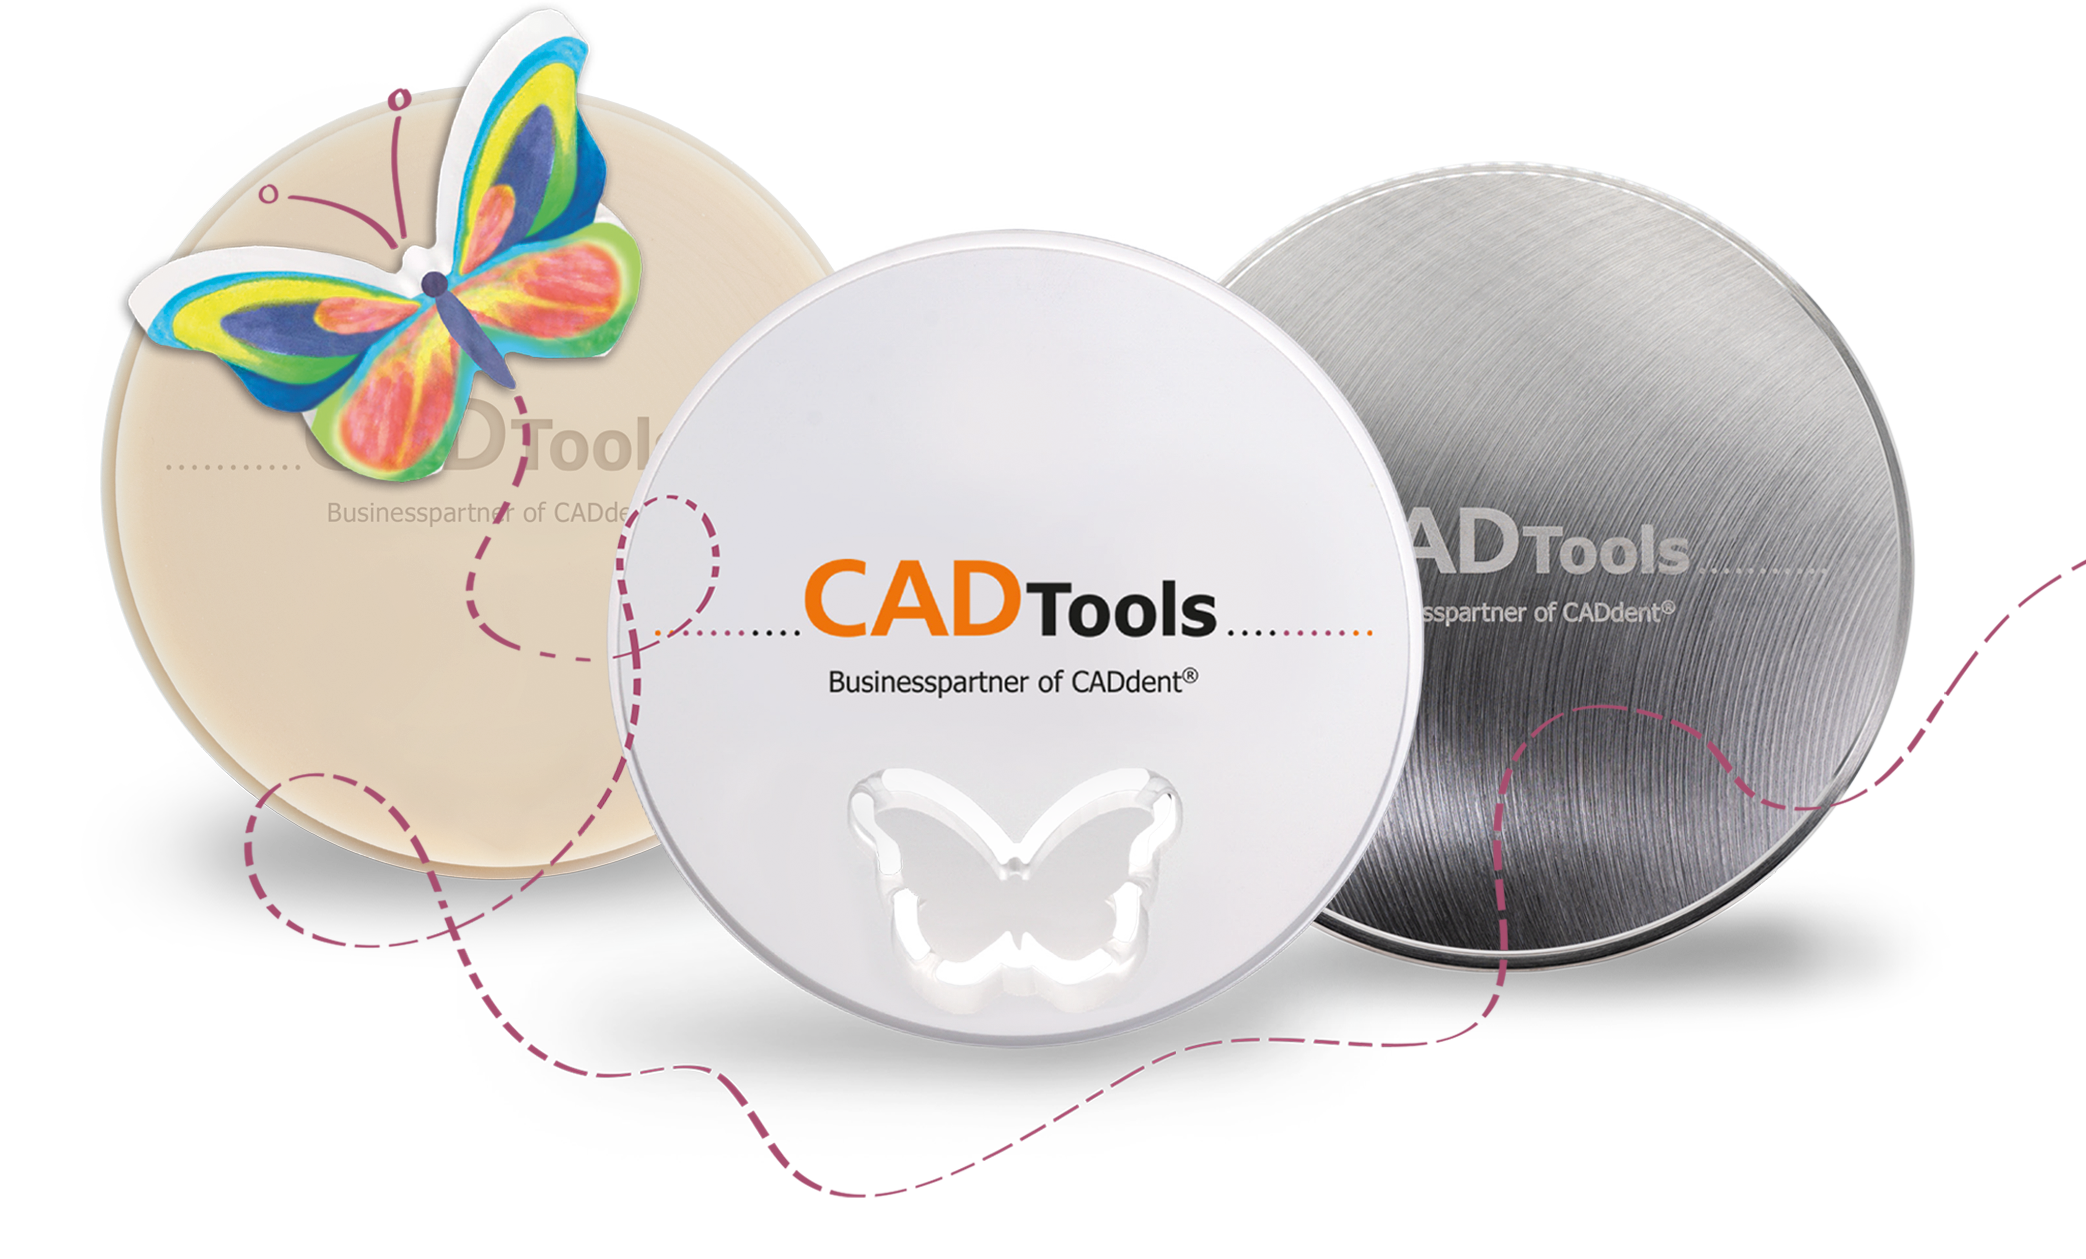 CADtools material variety from zirconia to titanium and PMMA